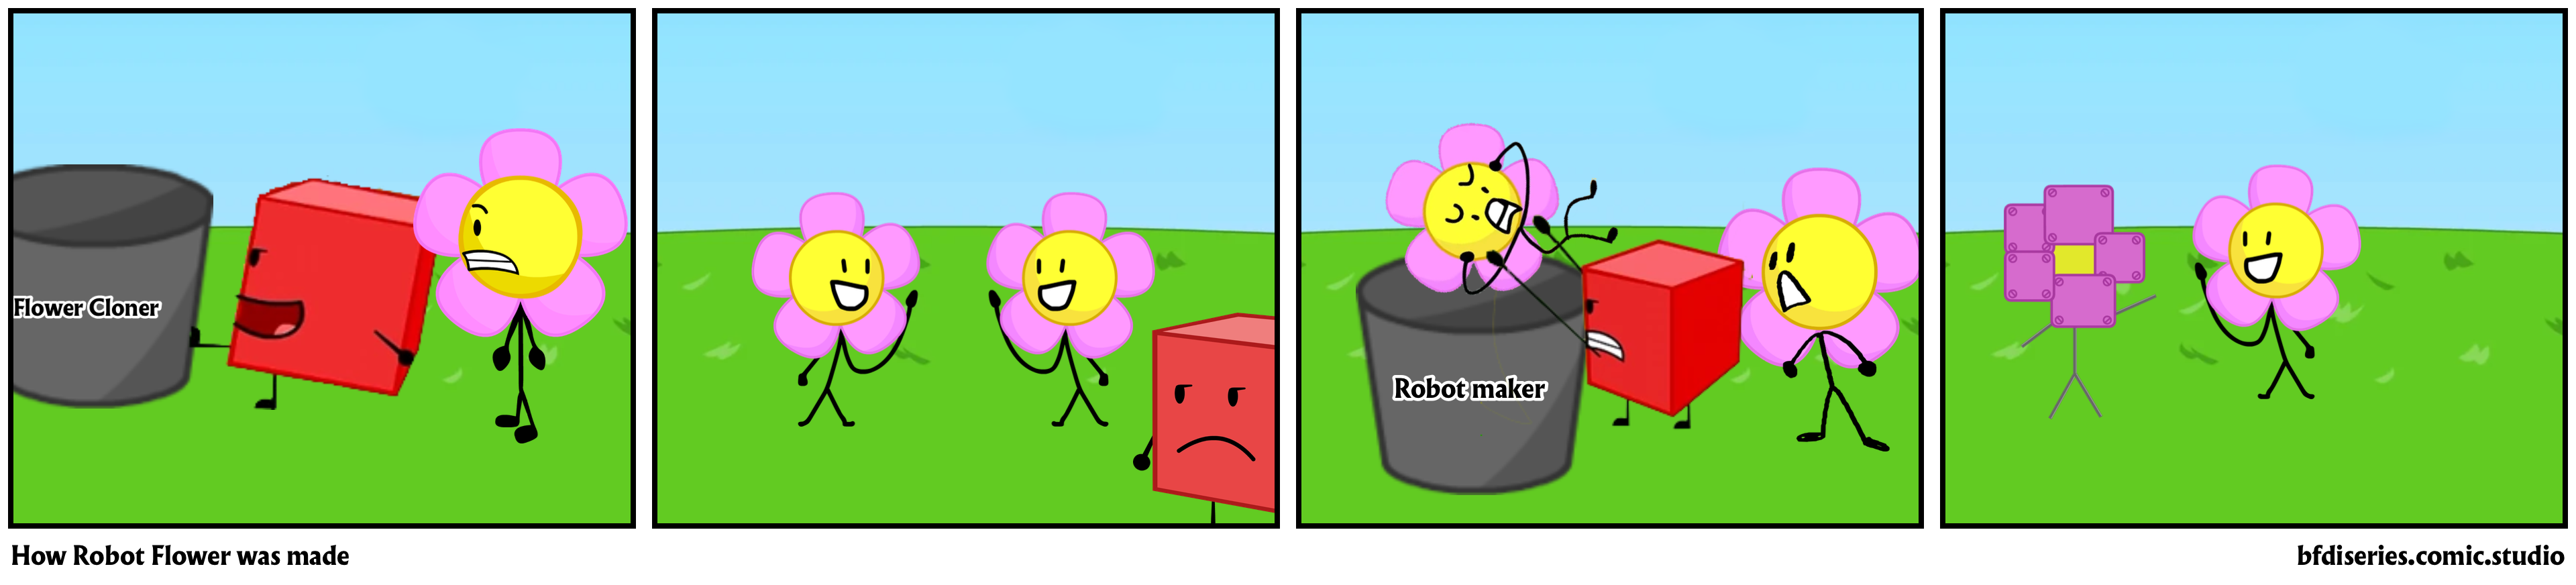 How Robot Flower was made